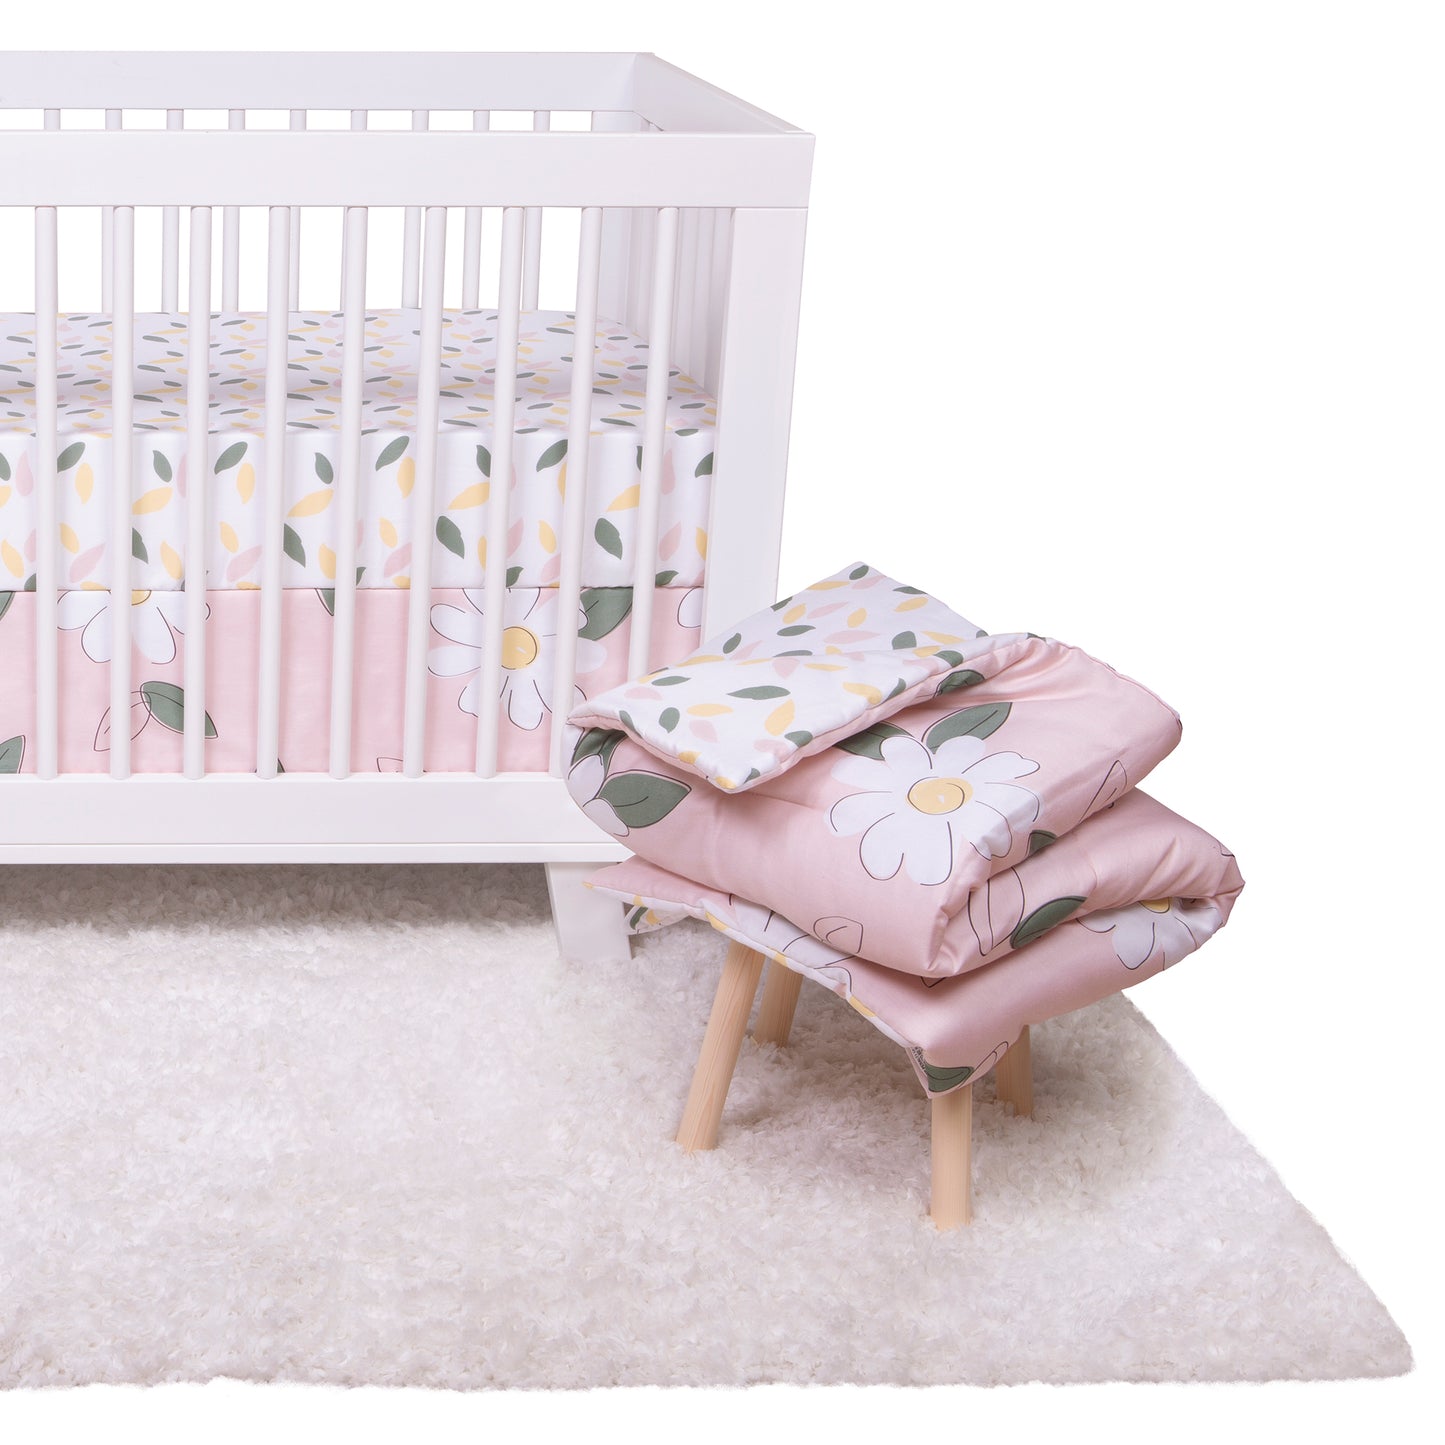 Lemon Floral Bedding Set with Main Crib Sheet and Skirt on a crib, and the quilt on a stool next to the crib